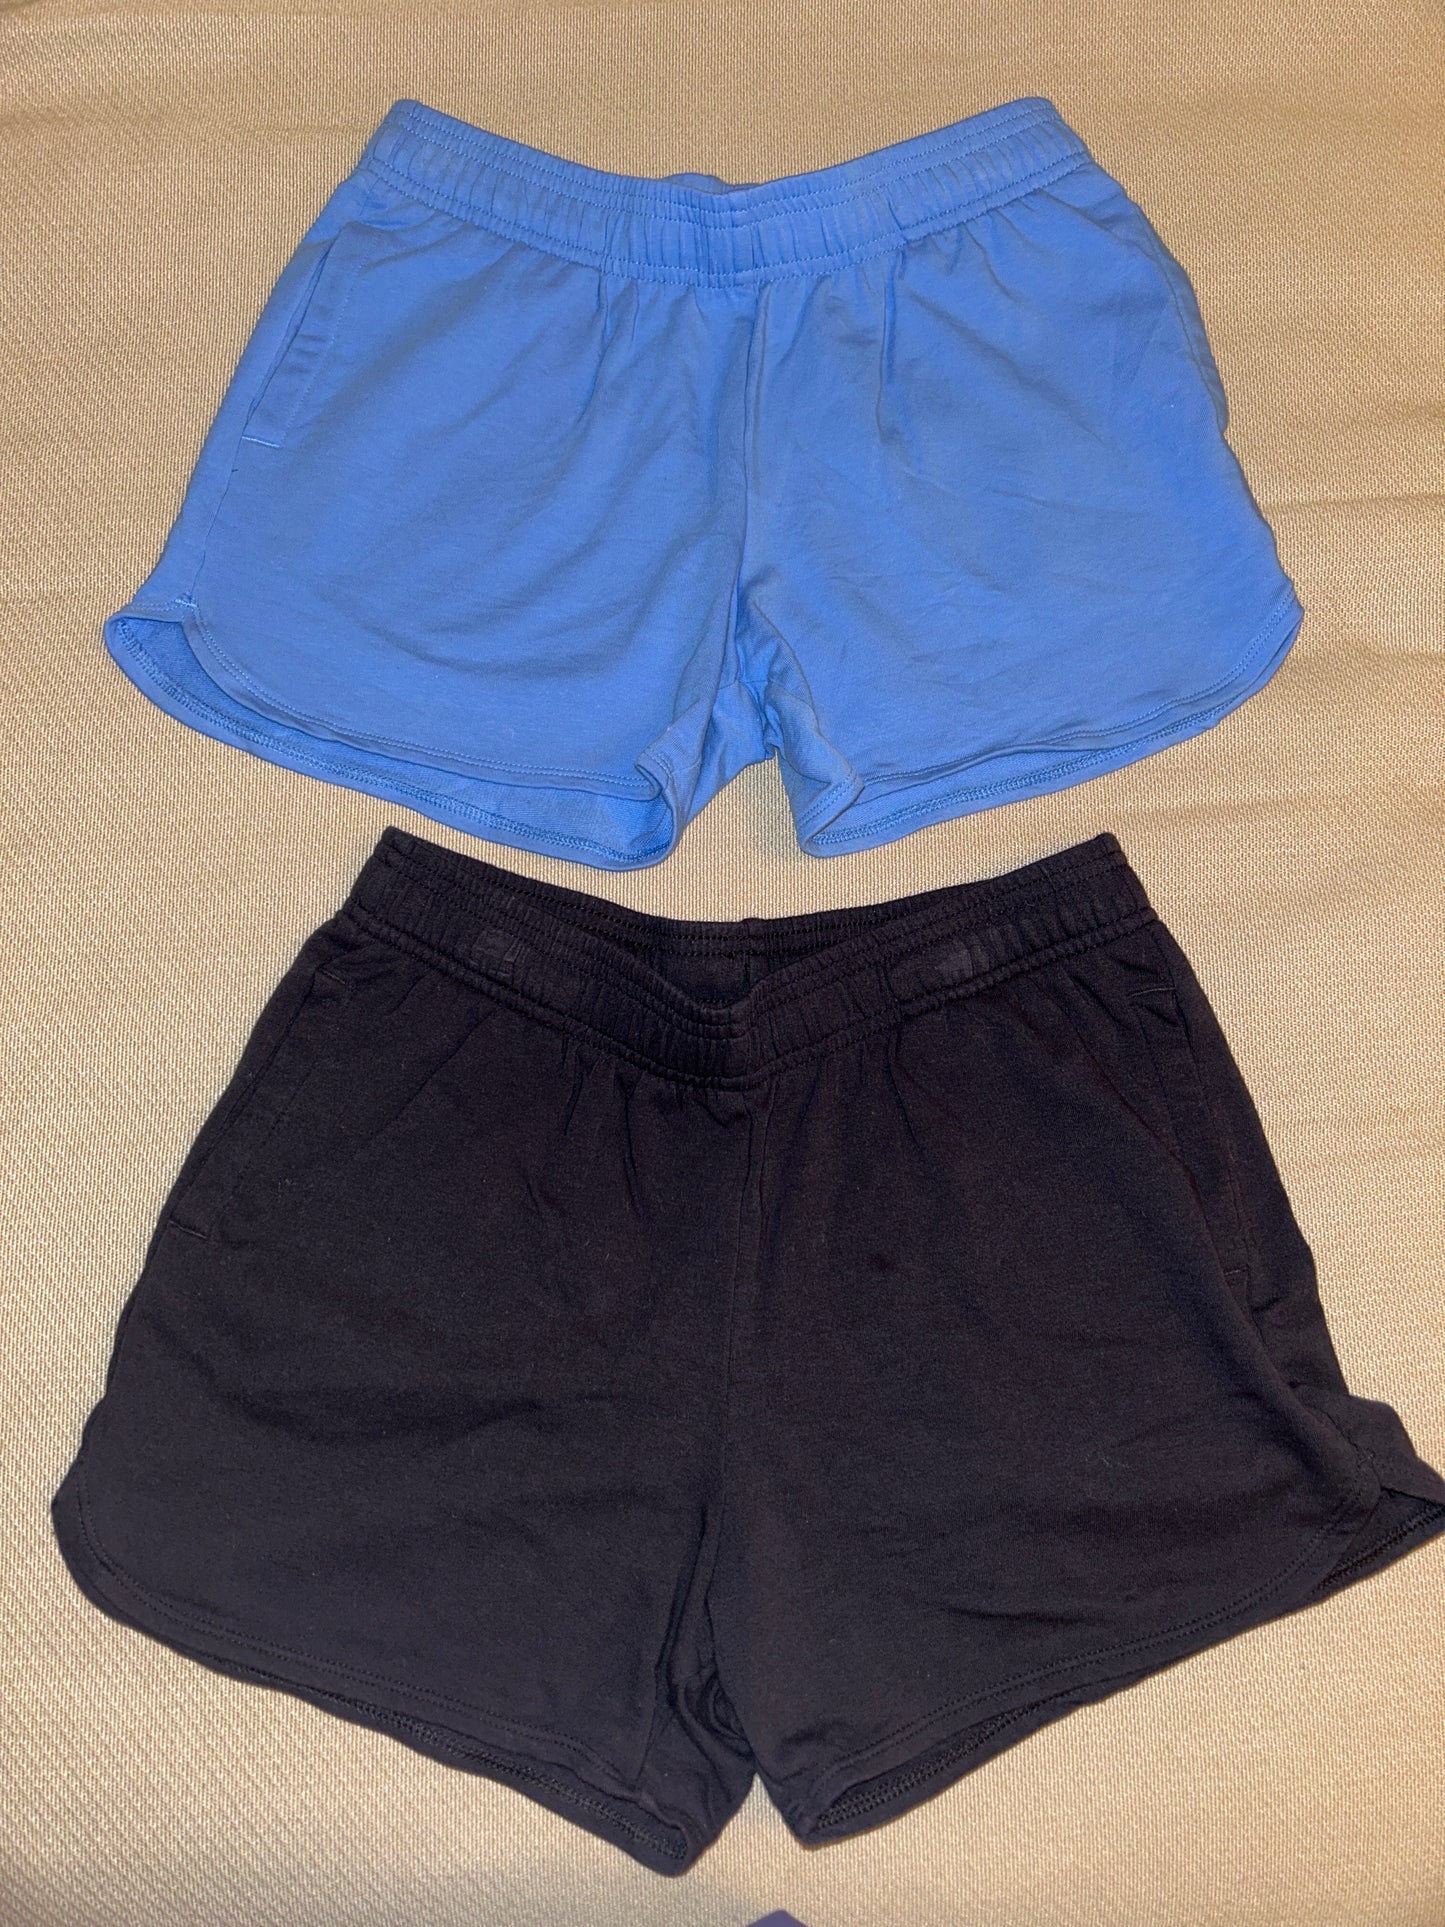 All in Motion/Girls Cotton Athletic Shorts Bundle/Size XL